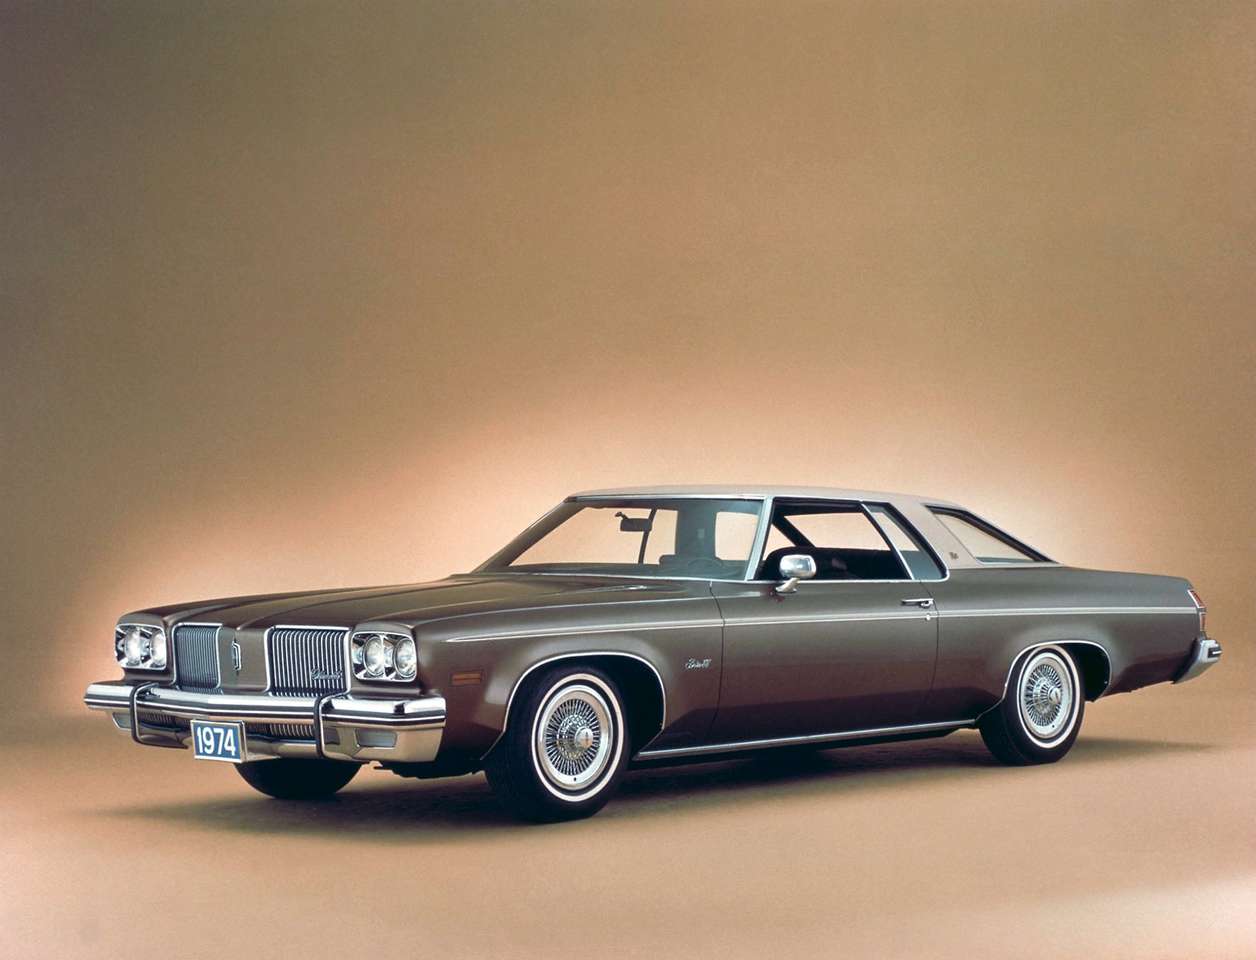 1974 Oldsmobile Delta 88 Royale Holiday Coupe puzzle online